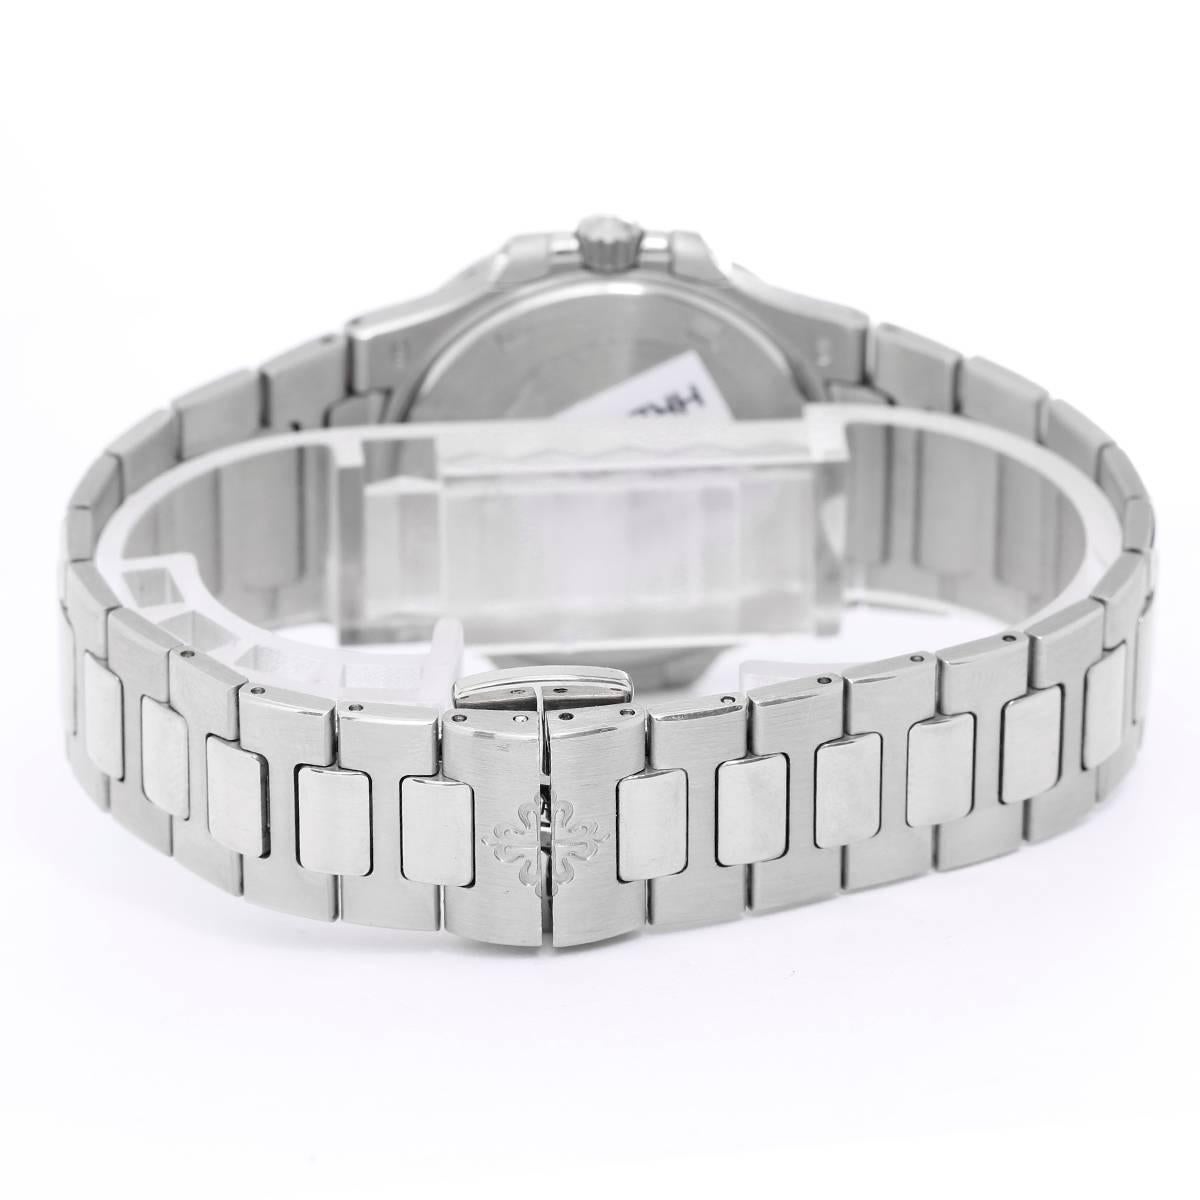 Patek Philippe & Co. Nautilus Ladies 7010 / 1G - 001 -  Quartz. 18K White Gold ( 32mm ) with Diamond bezel. Opaline white dial with gold applied hour markers with luminescent coating. Date at 3 o'clock. 18k white gold bracelet with Nautilus